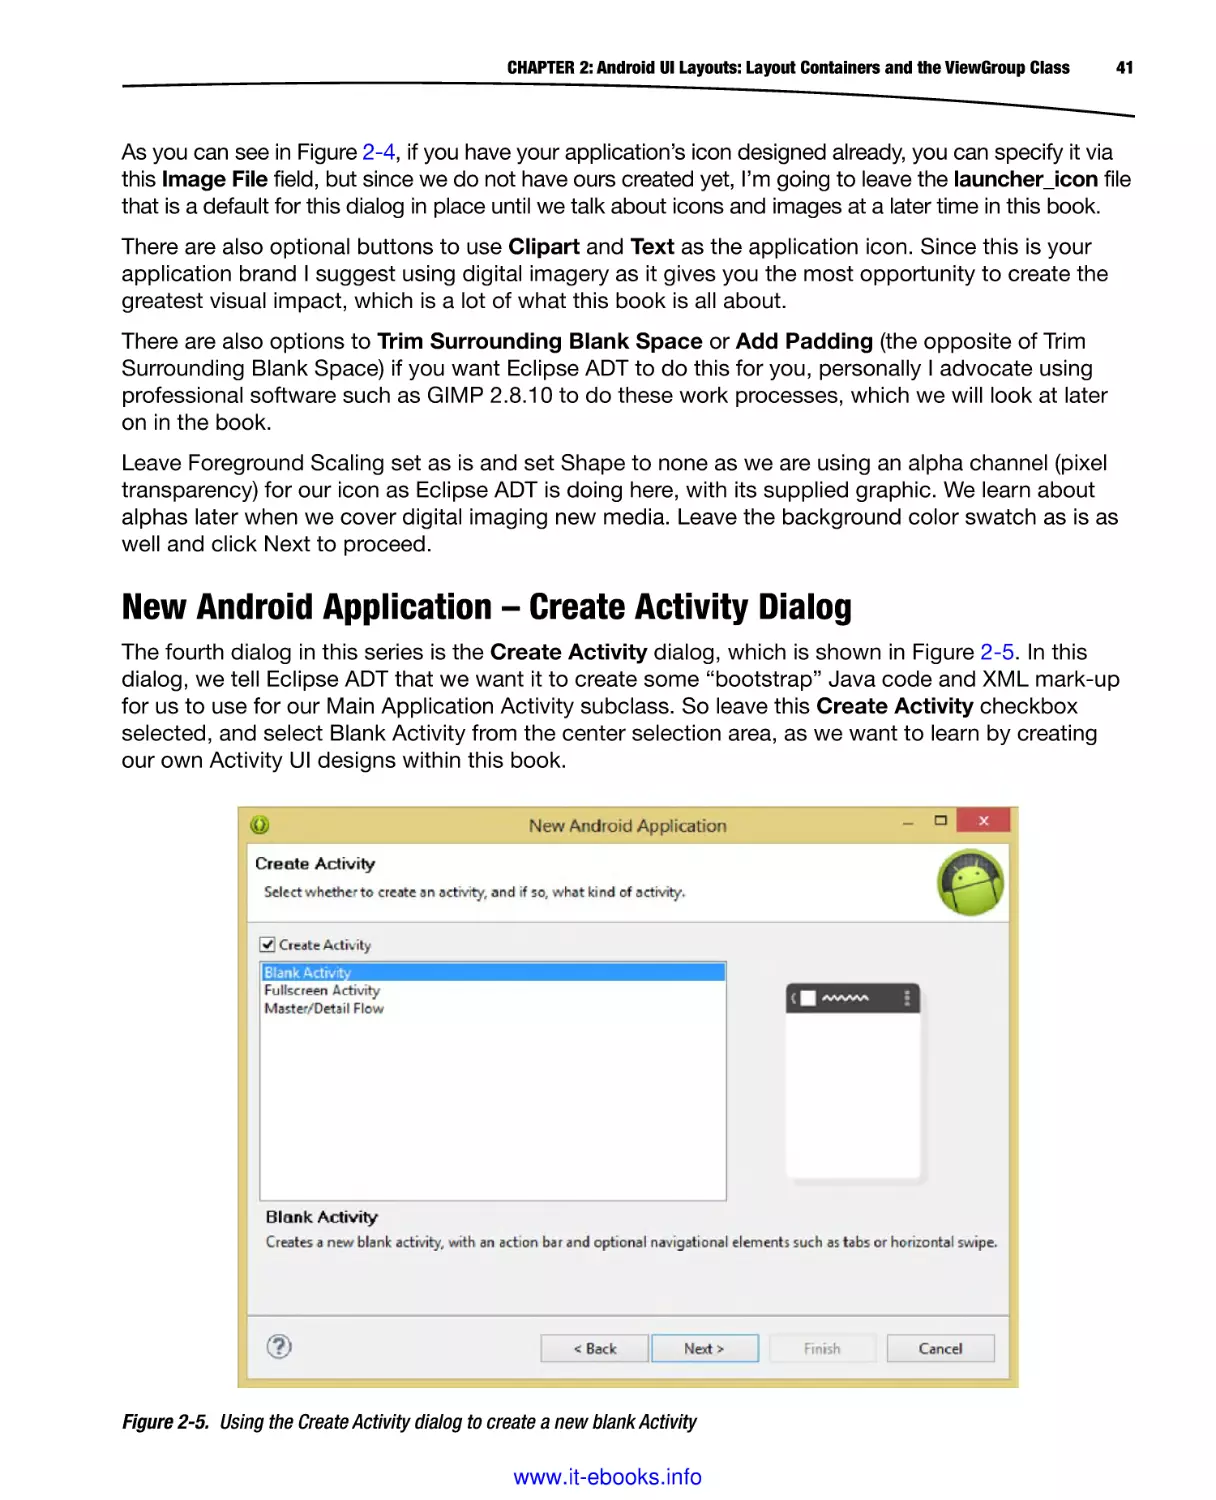 New Android Application – Create Activity Dialog